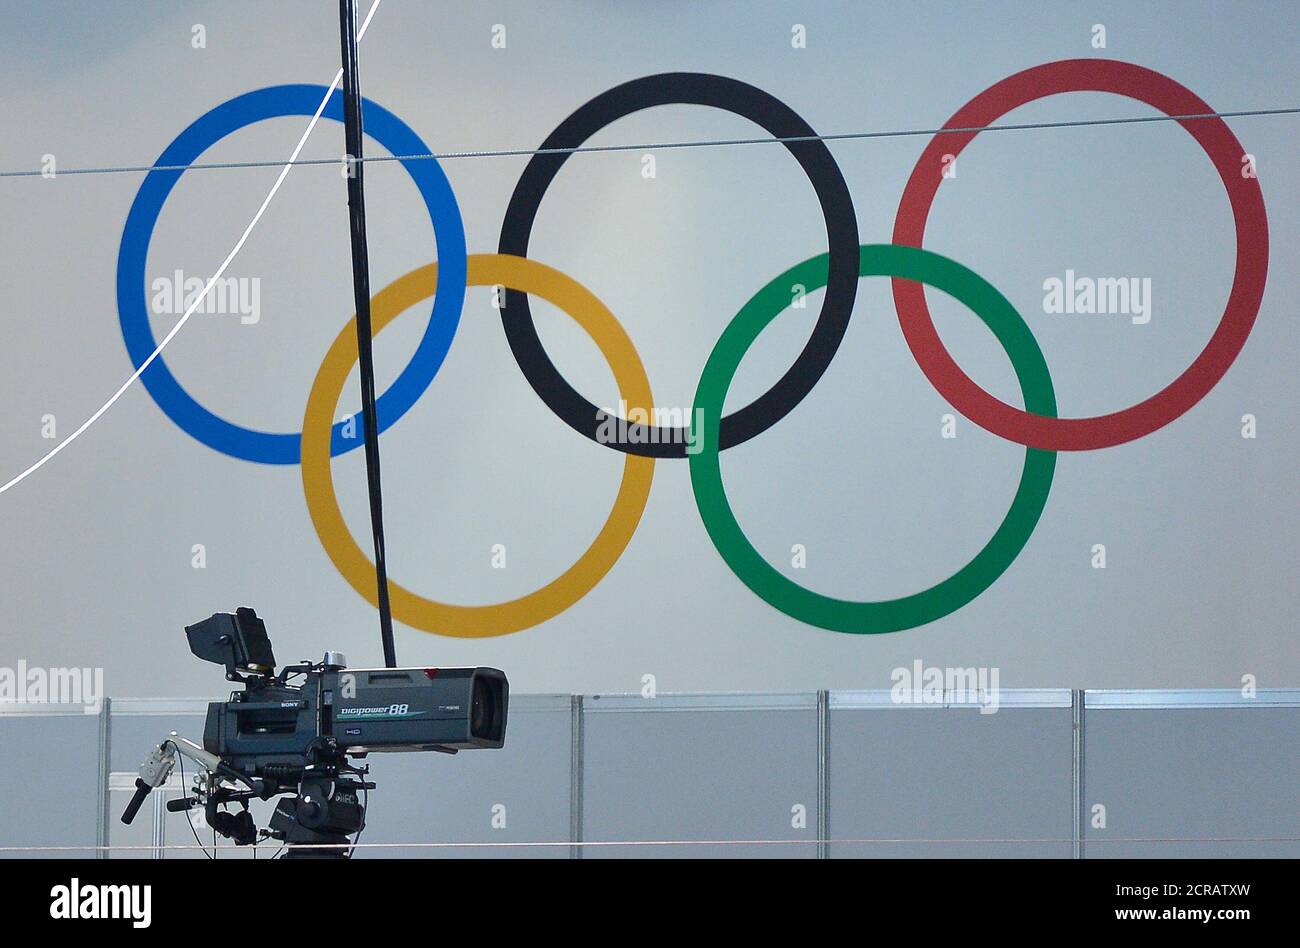 A broadcast camera is seen at the Aquatics Centre at the Olympic Park in Stratford, the location of the London 2012 Olympic Games, in east London July 20, 2012. REUTERS/Toby Melville  (BRITAIN - Tags: SPORT OLYMPICS MEDIA) Stock Photo